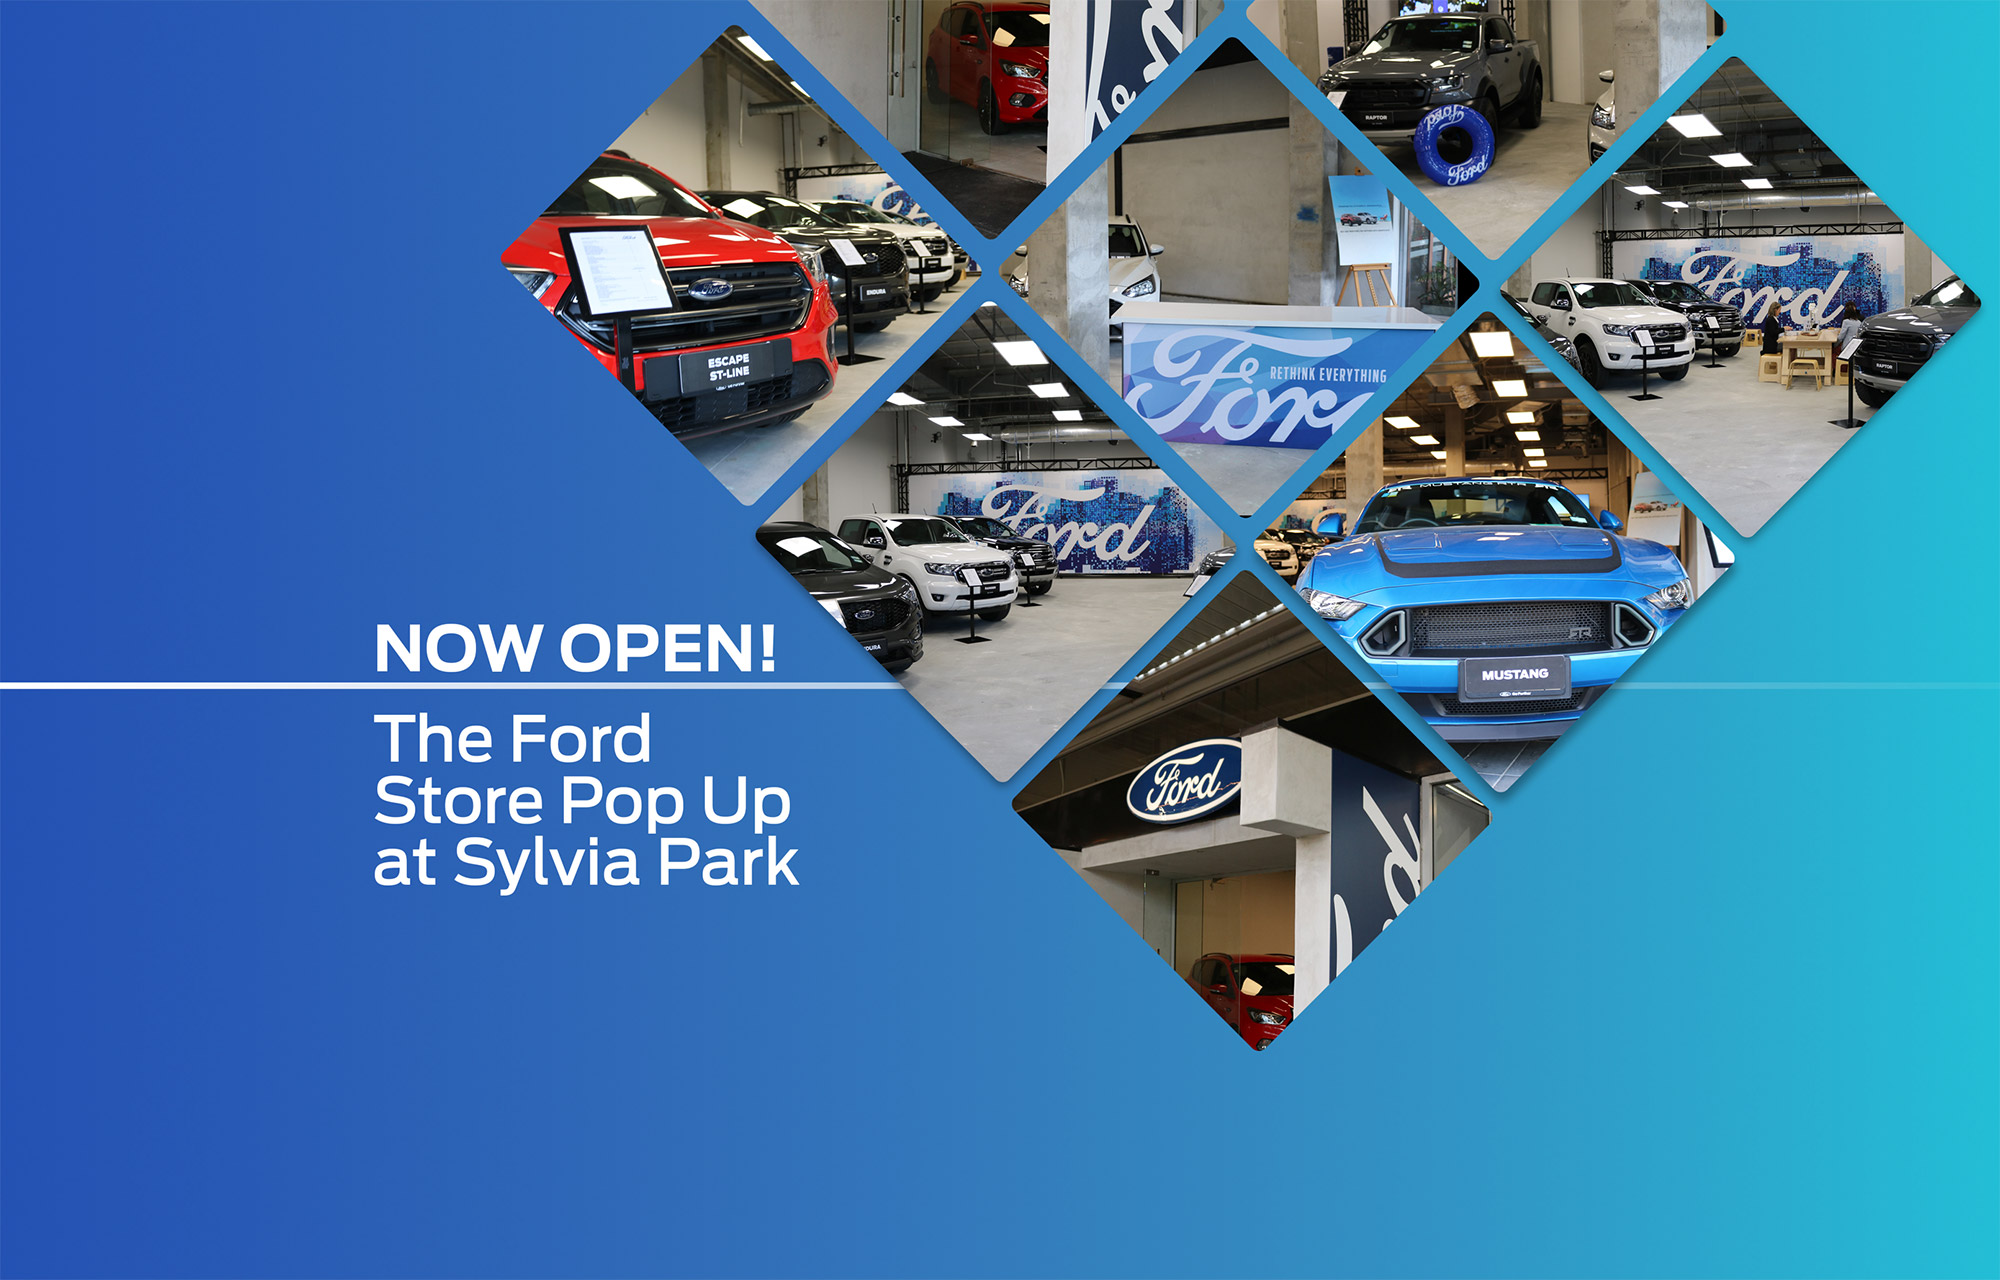 Now Open! The Ford Store Pop Up at Sylvia Park